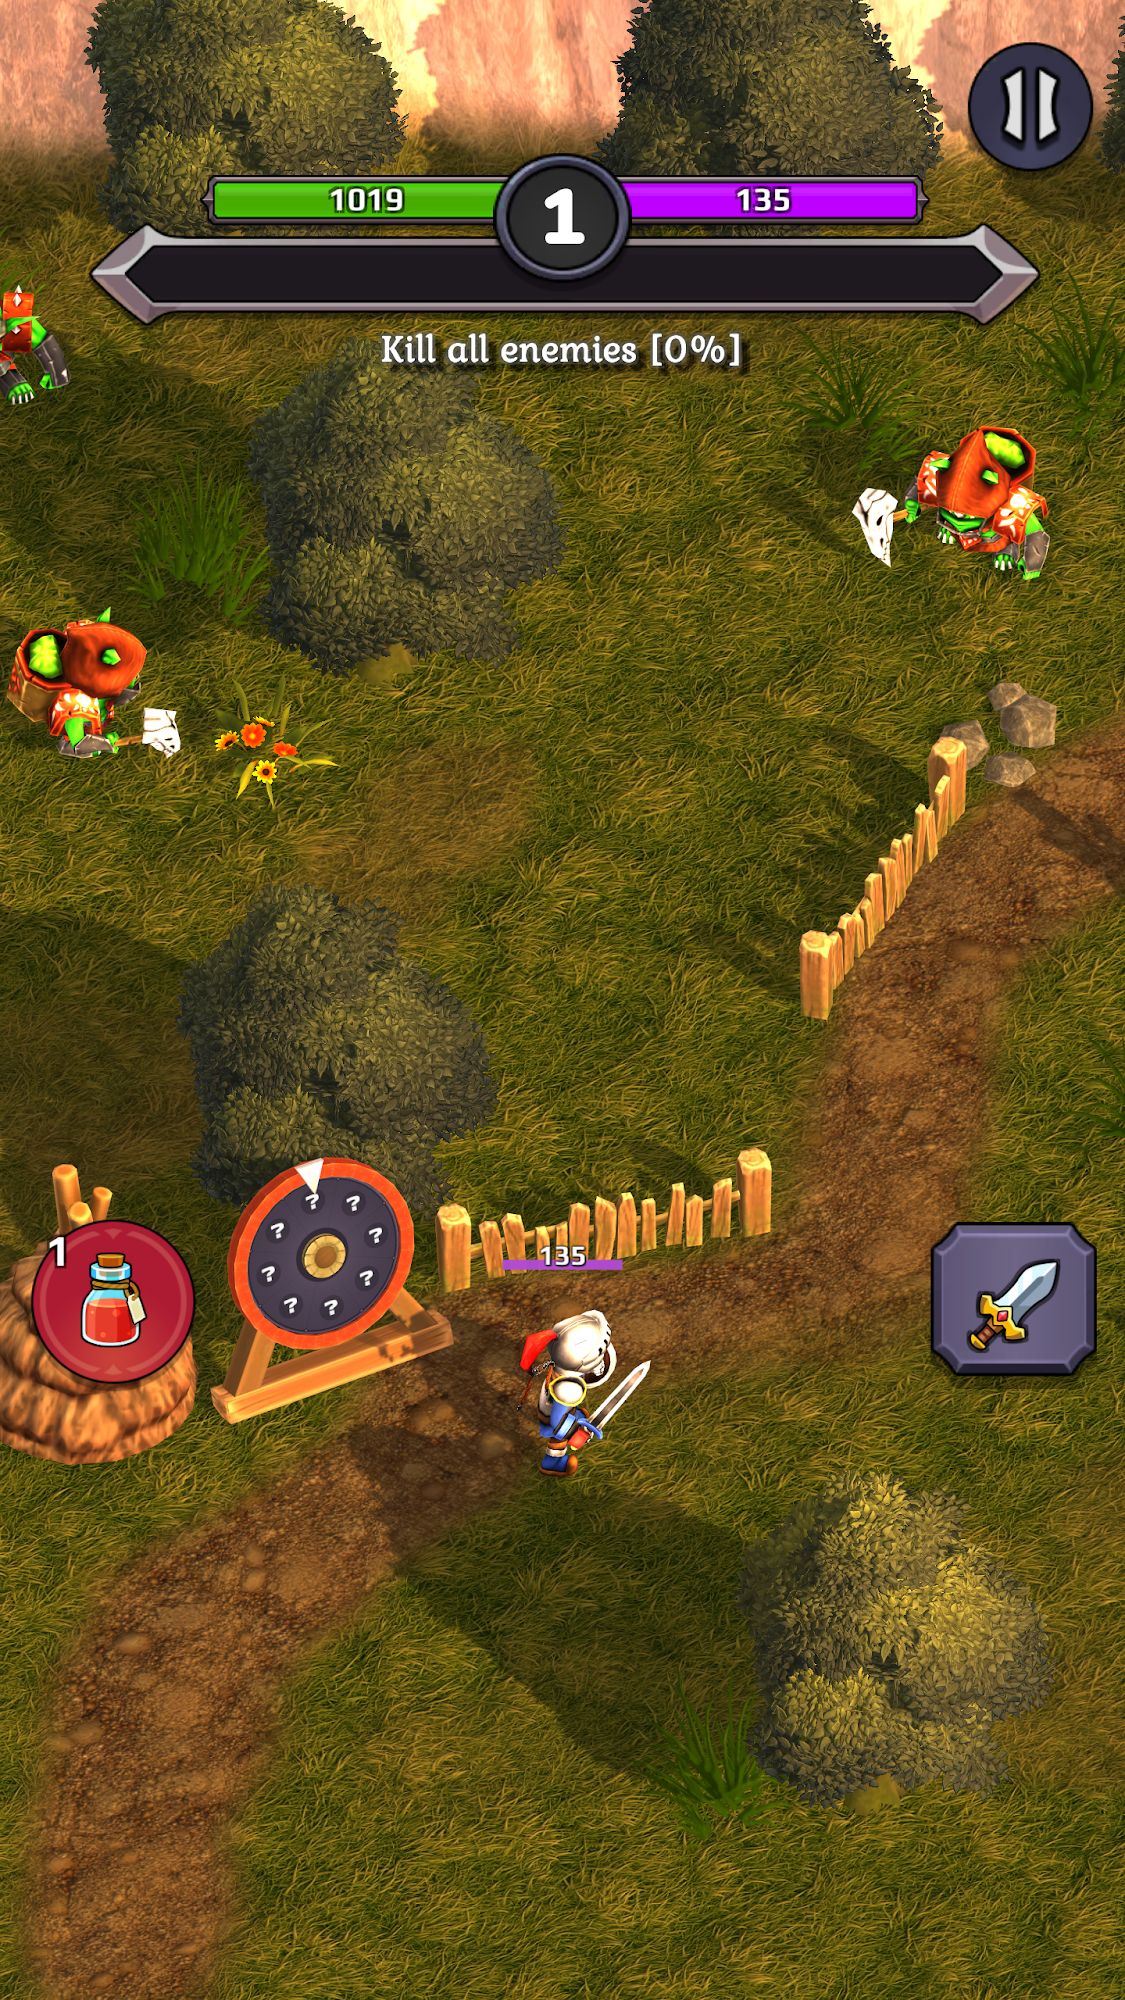 Full version of Android Fantasy game apk Crusado: Heroes Roguelike RPG for tablet and phone.